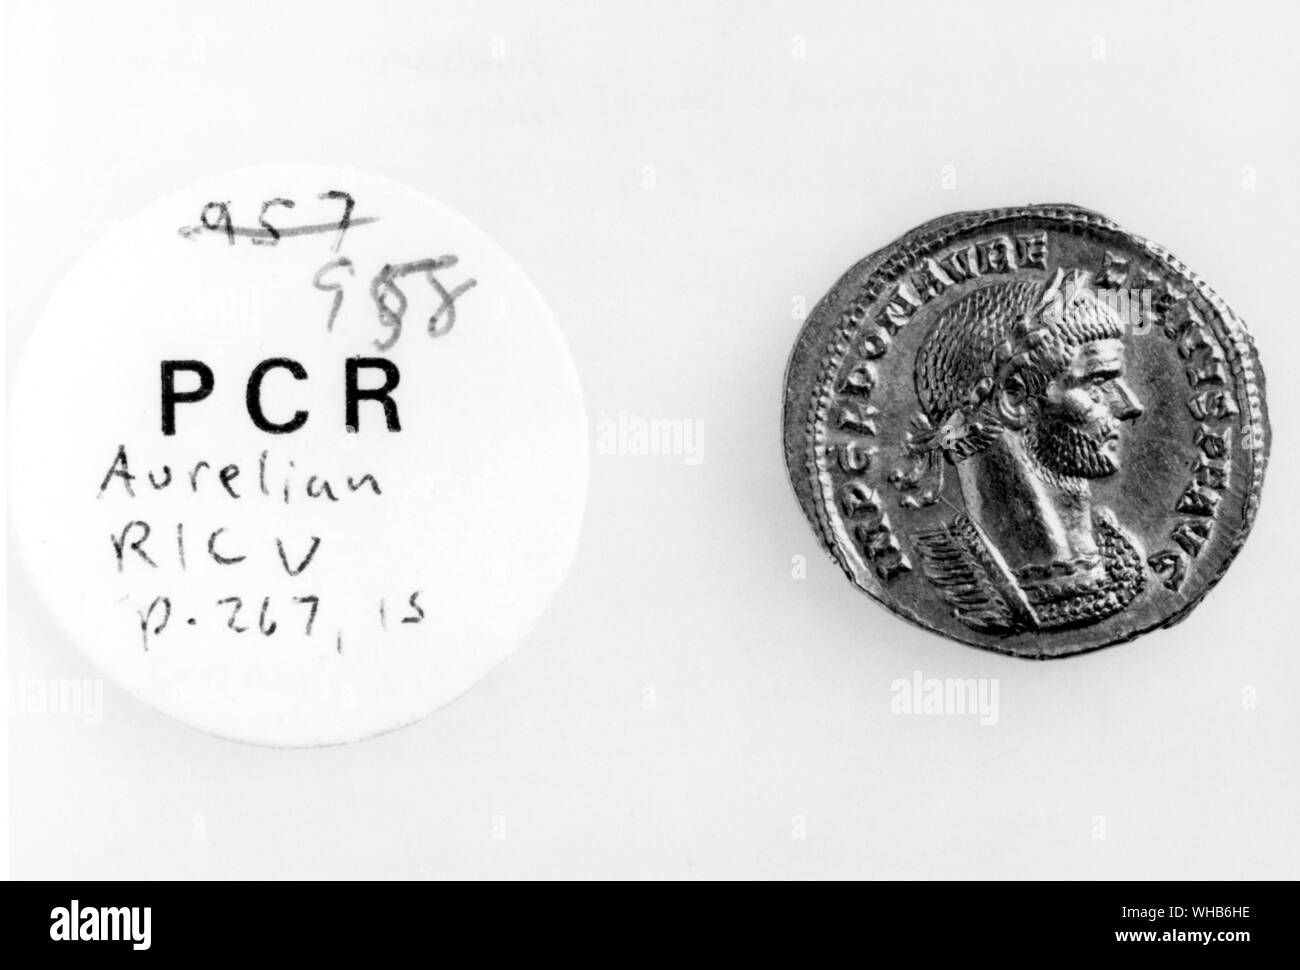 Caption coin of Aurelian. Lucius Domitius Aurelianus (September 9, 214 - September 275), known in English as Aurelian, Roman Emperor (270 - 275), was the second of several highly successful soldier-emperors who helped the Roman Empire regain its power during the latter part of the third century and the beginning of the fourth.. Aurelian was born in Dacia ripensis or Sirmium (Pannonia), to an obscure provincial family. his father was tenant to a senator named Aurelius, who gave his name to the family. Aurelian served as a general in several wars, and his success ultimately made him the Stock Photo